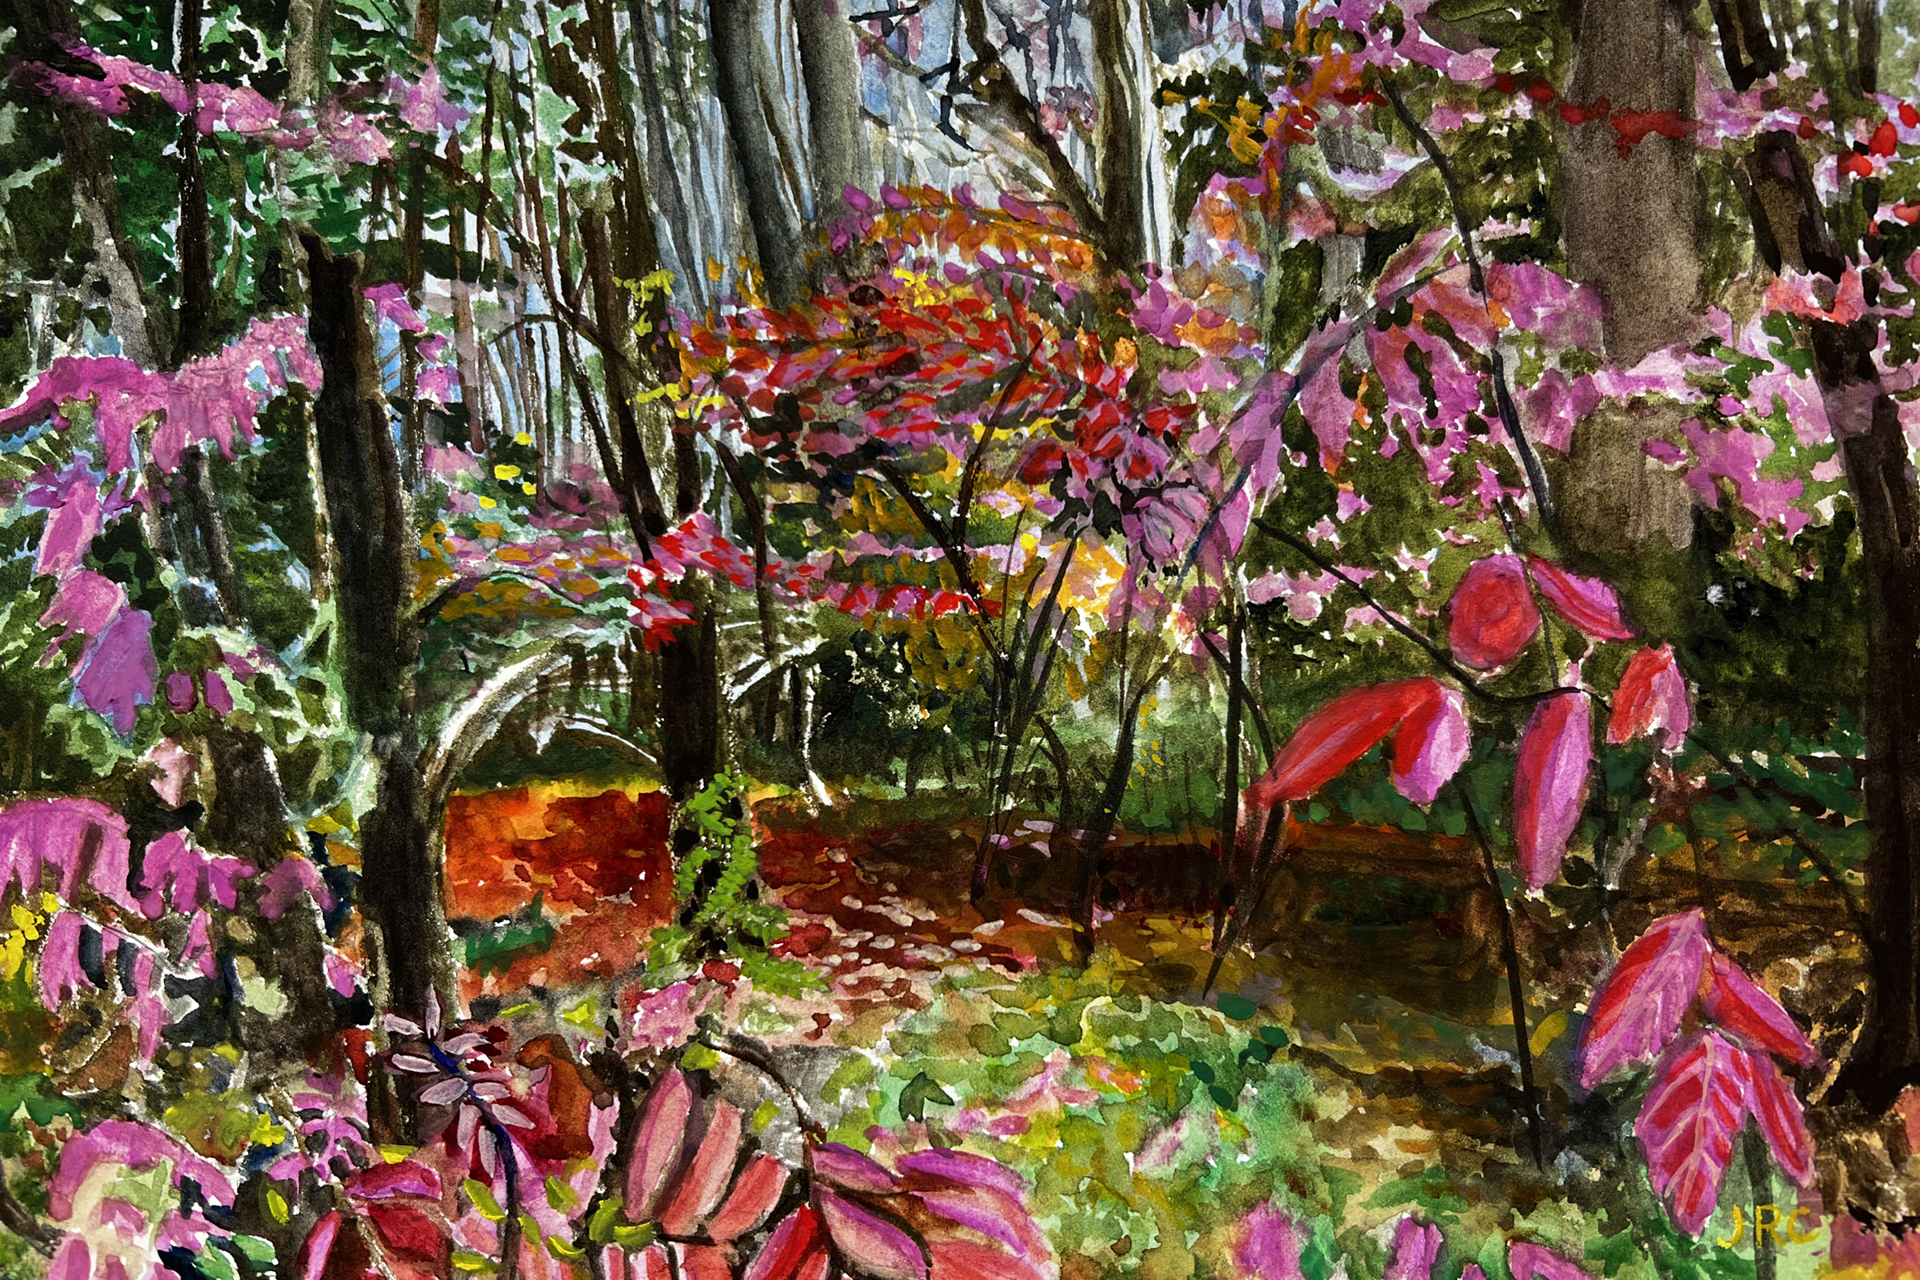 Painting of bright pink flowers on vines in a forest